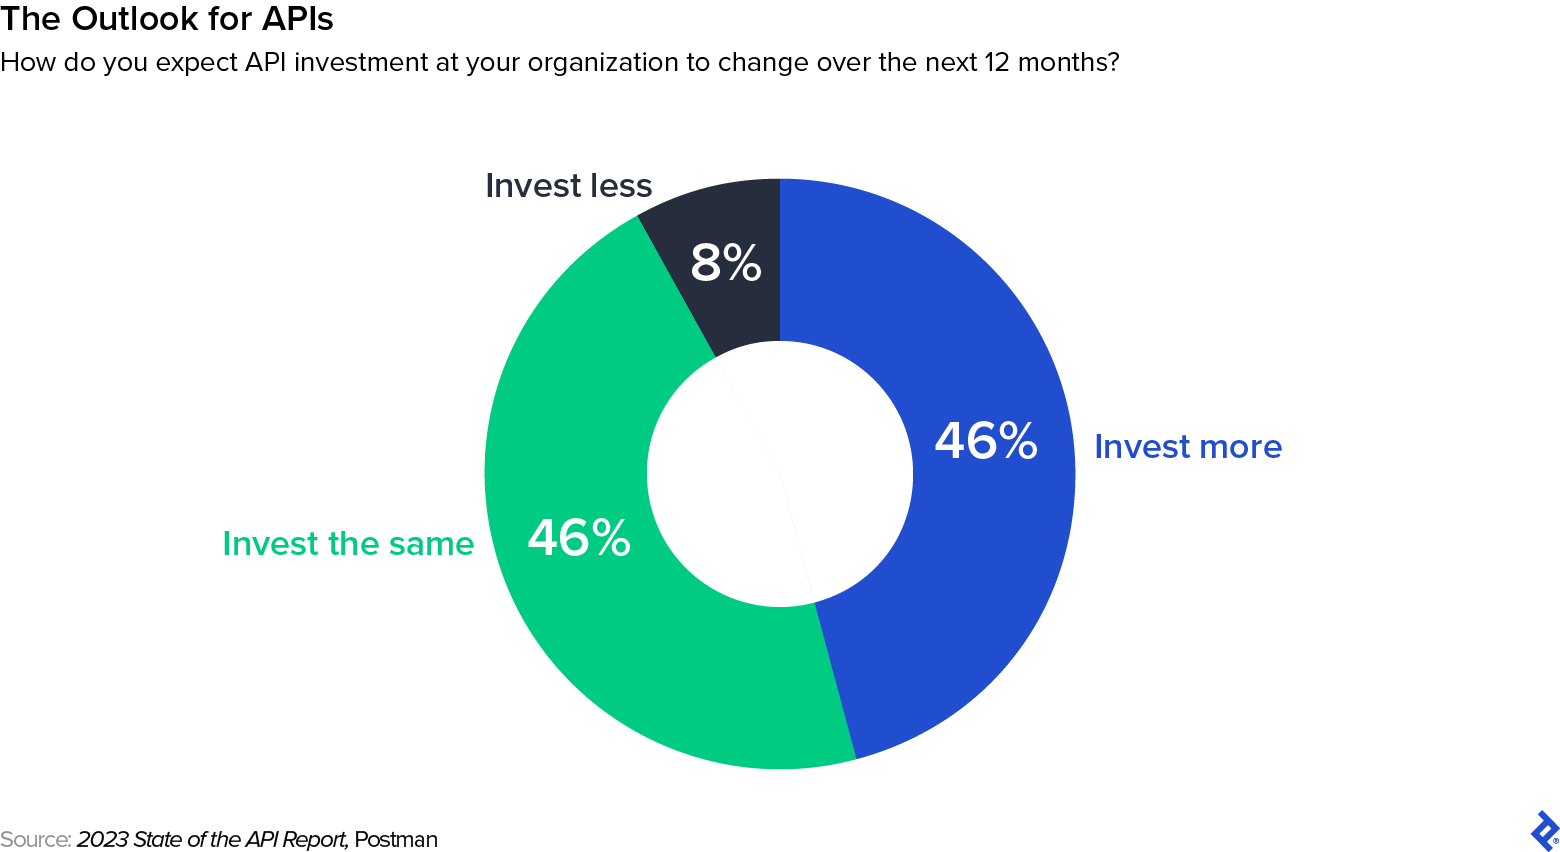 When asked about API investment at their organization over the next year, 46% of respondents said it would invest more, 46% said invest the same, and 8% said invest less.